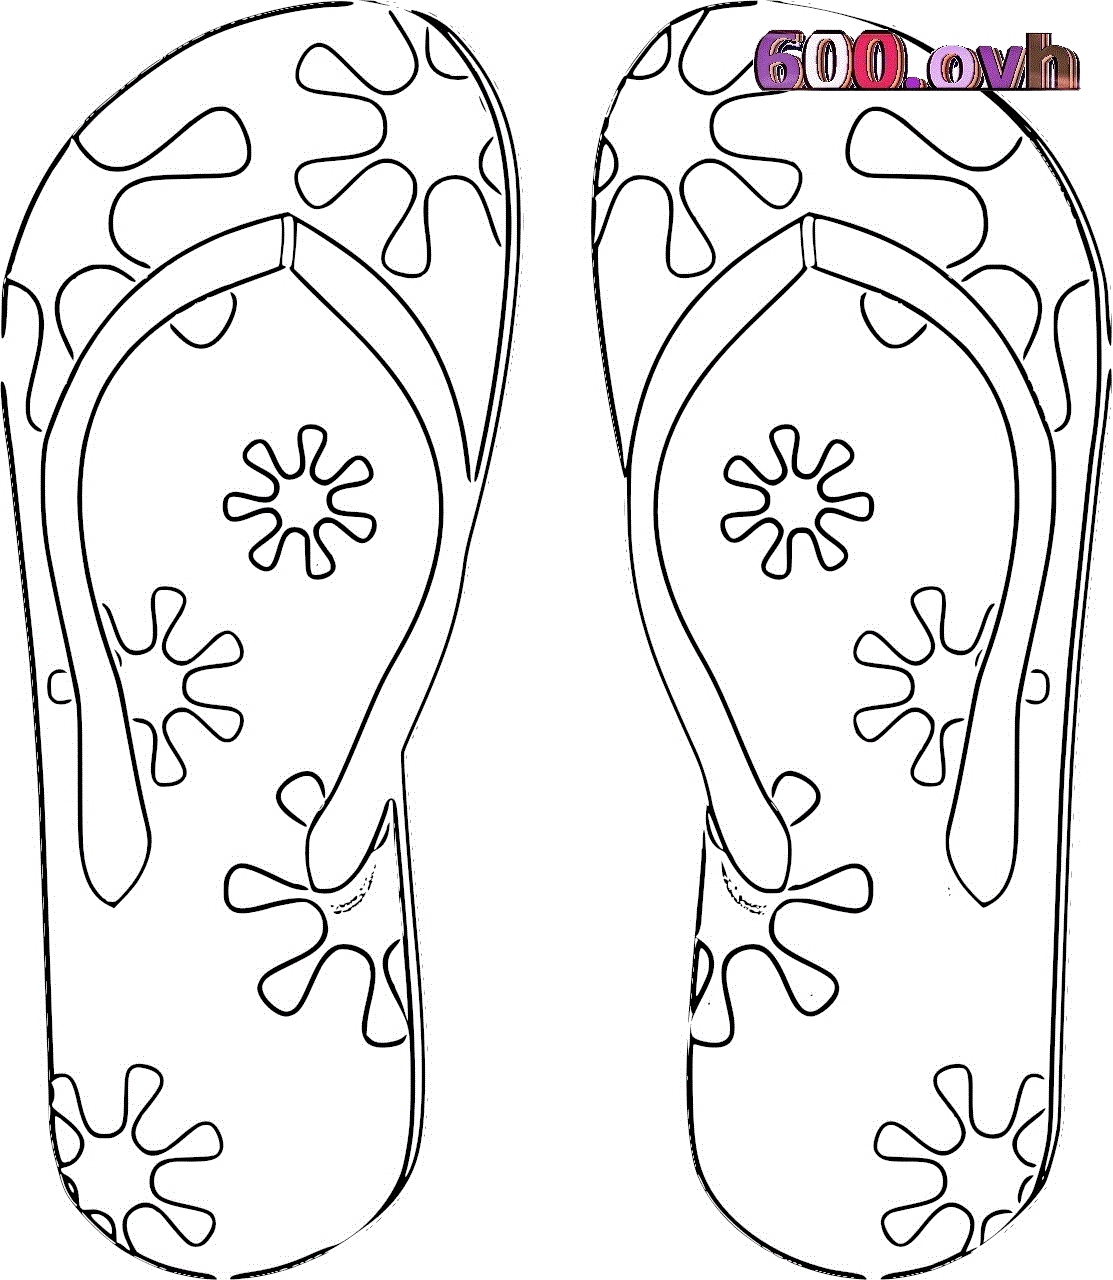 Plateau Coloring Pages at GetColorings.com | Free printable colorings ...